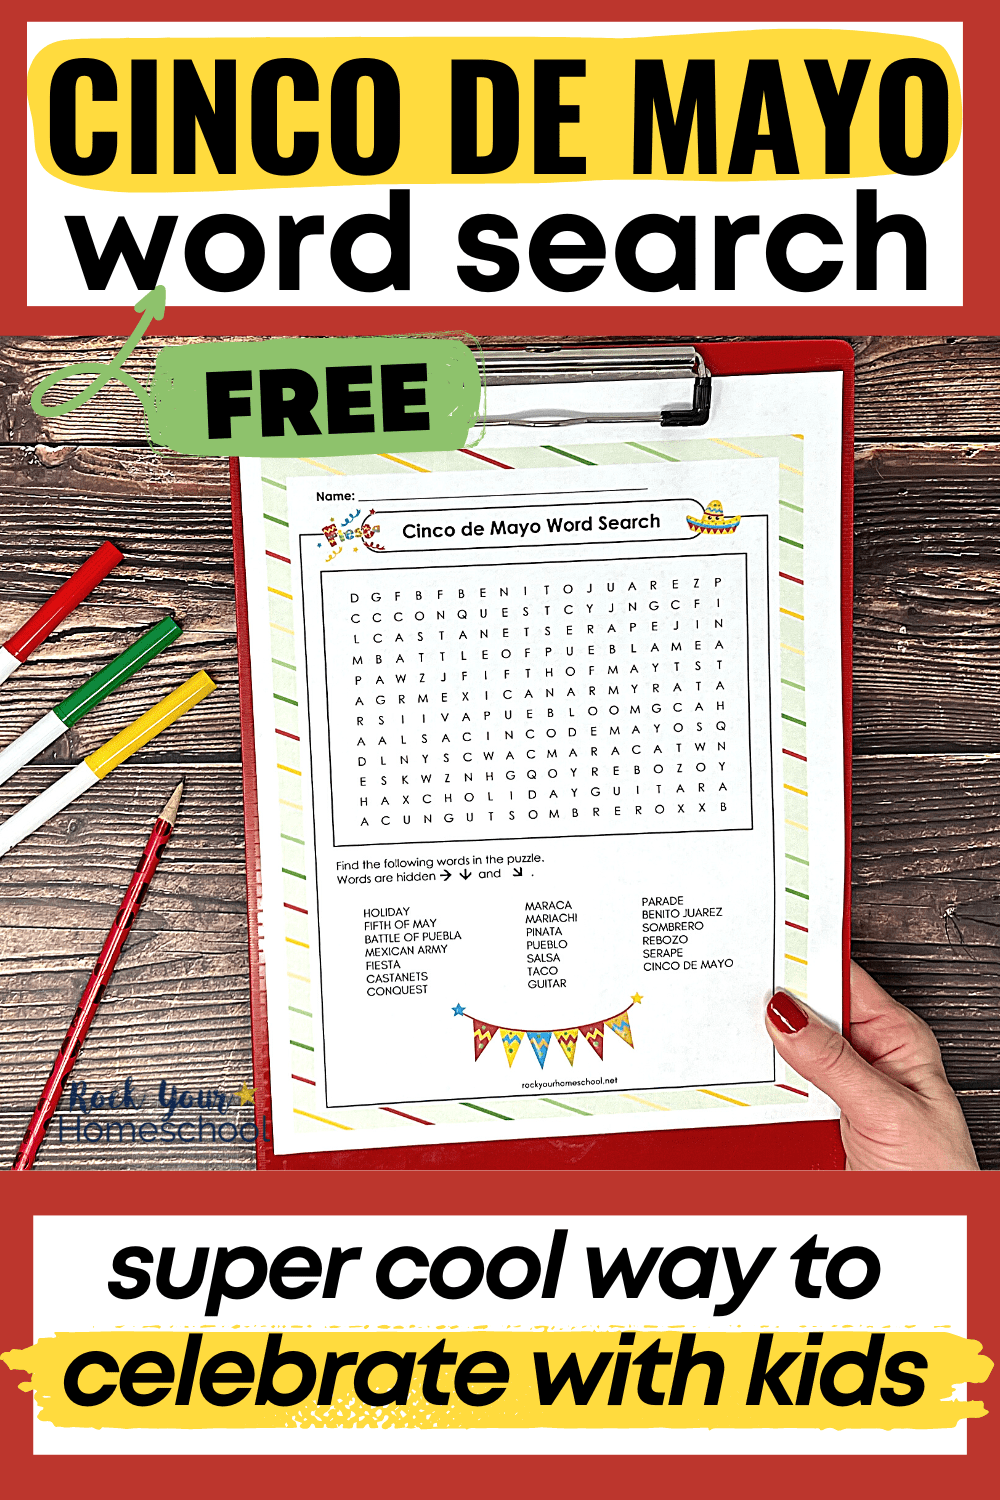 woman holding red clipboard with free printable Cinco de Mayo word search activity with markers and red pencil on wood background